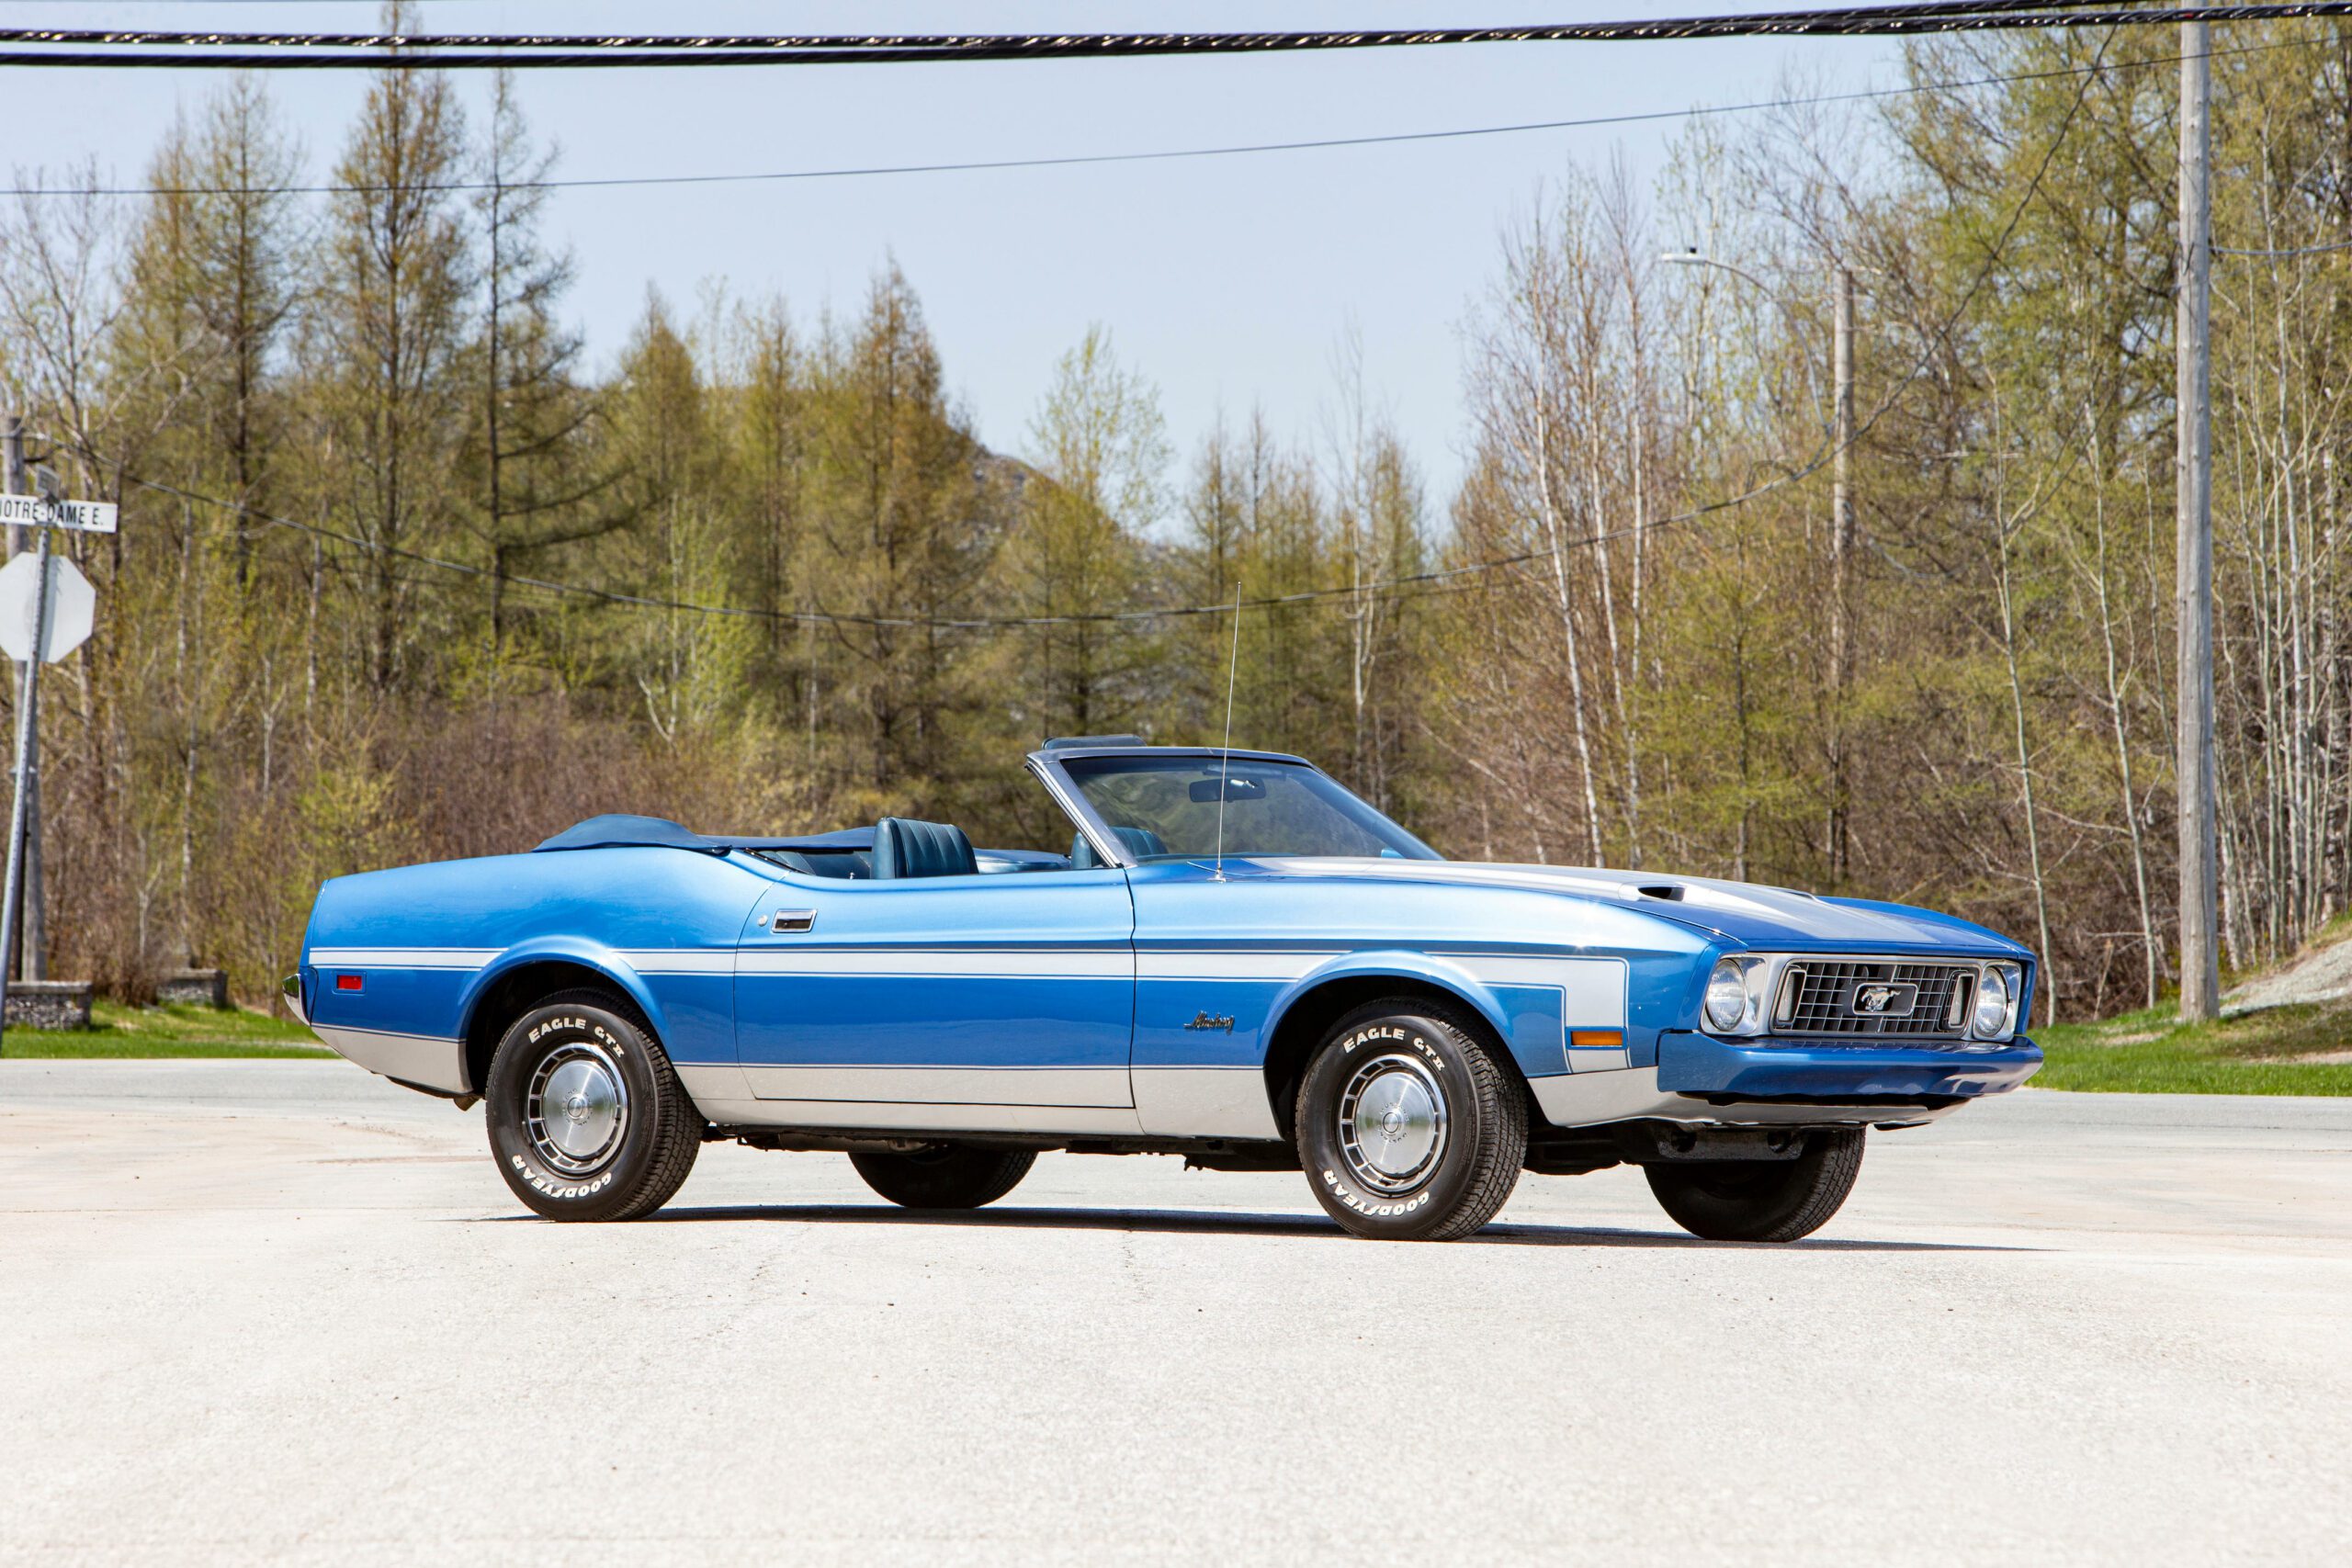 1973 Ford Mustang Convertible, ford, Ford Mustang